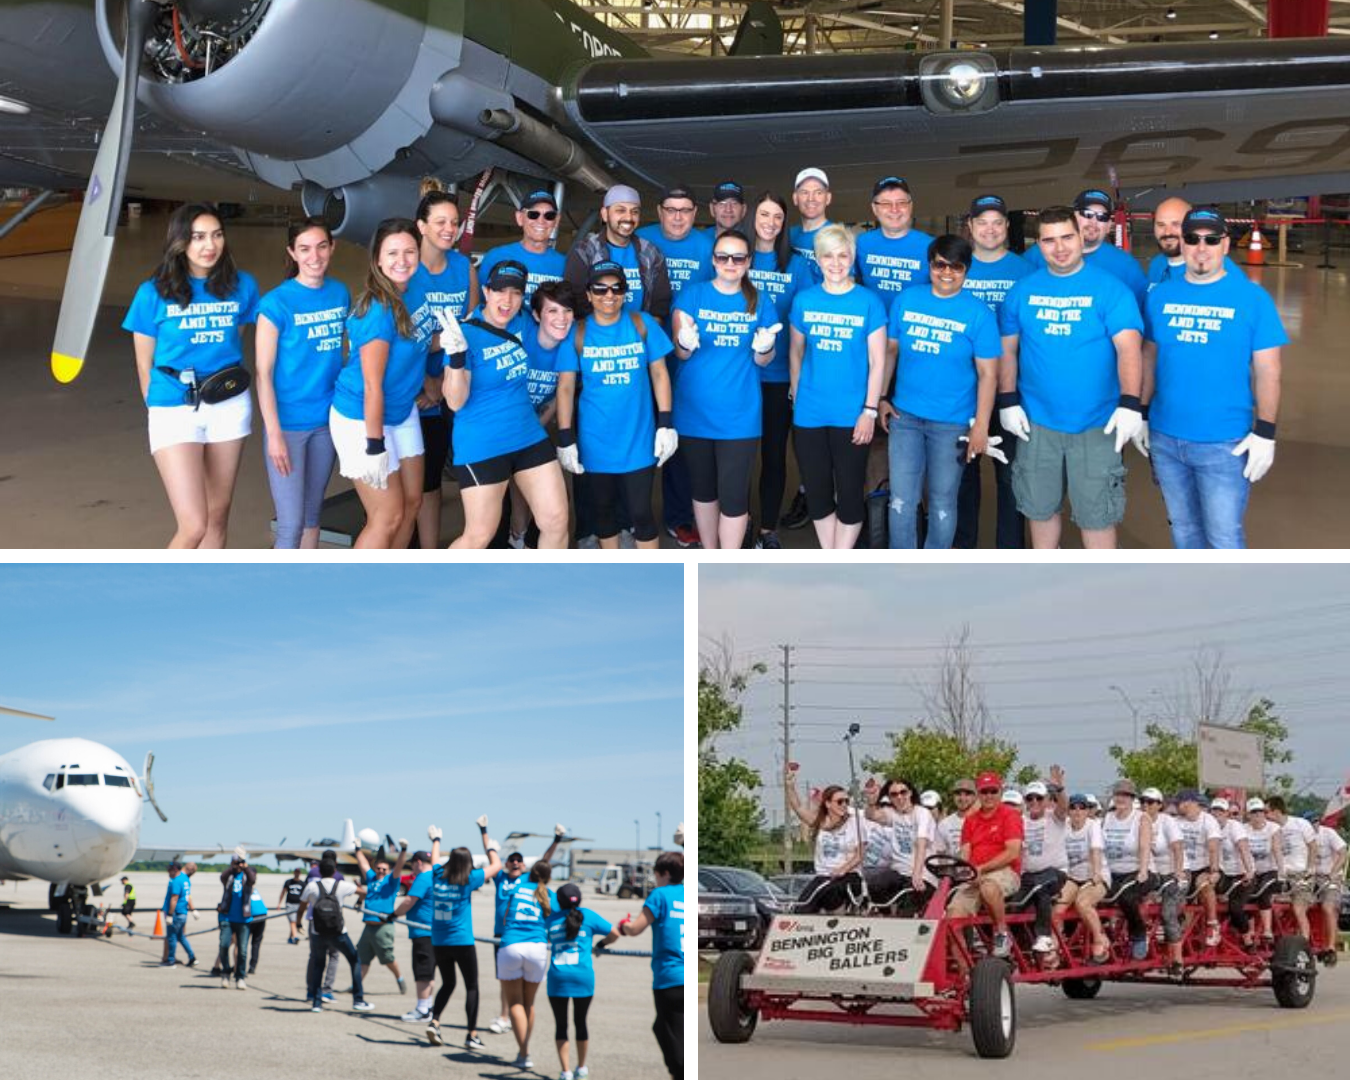 Three pictures: | Top | Bennington and the Jets team members pose with a plane behind them at the John C. Munro Hamilton International Airport prior to pulling a plane in support of McMaster Children’s Hospital. | Bottom, left | The team that just pulled a plane are on the tarmac with one hand on the rope and the other arm up in celebration of their feat. That plane was heavy! | Bottom, right | All aboard! Thirty Bennington team members are packed on to a giant red bike, smiling and waving to the camera. This ride was in support of the Heart and Stroke’s Big Bike Race.